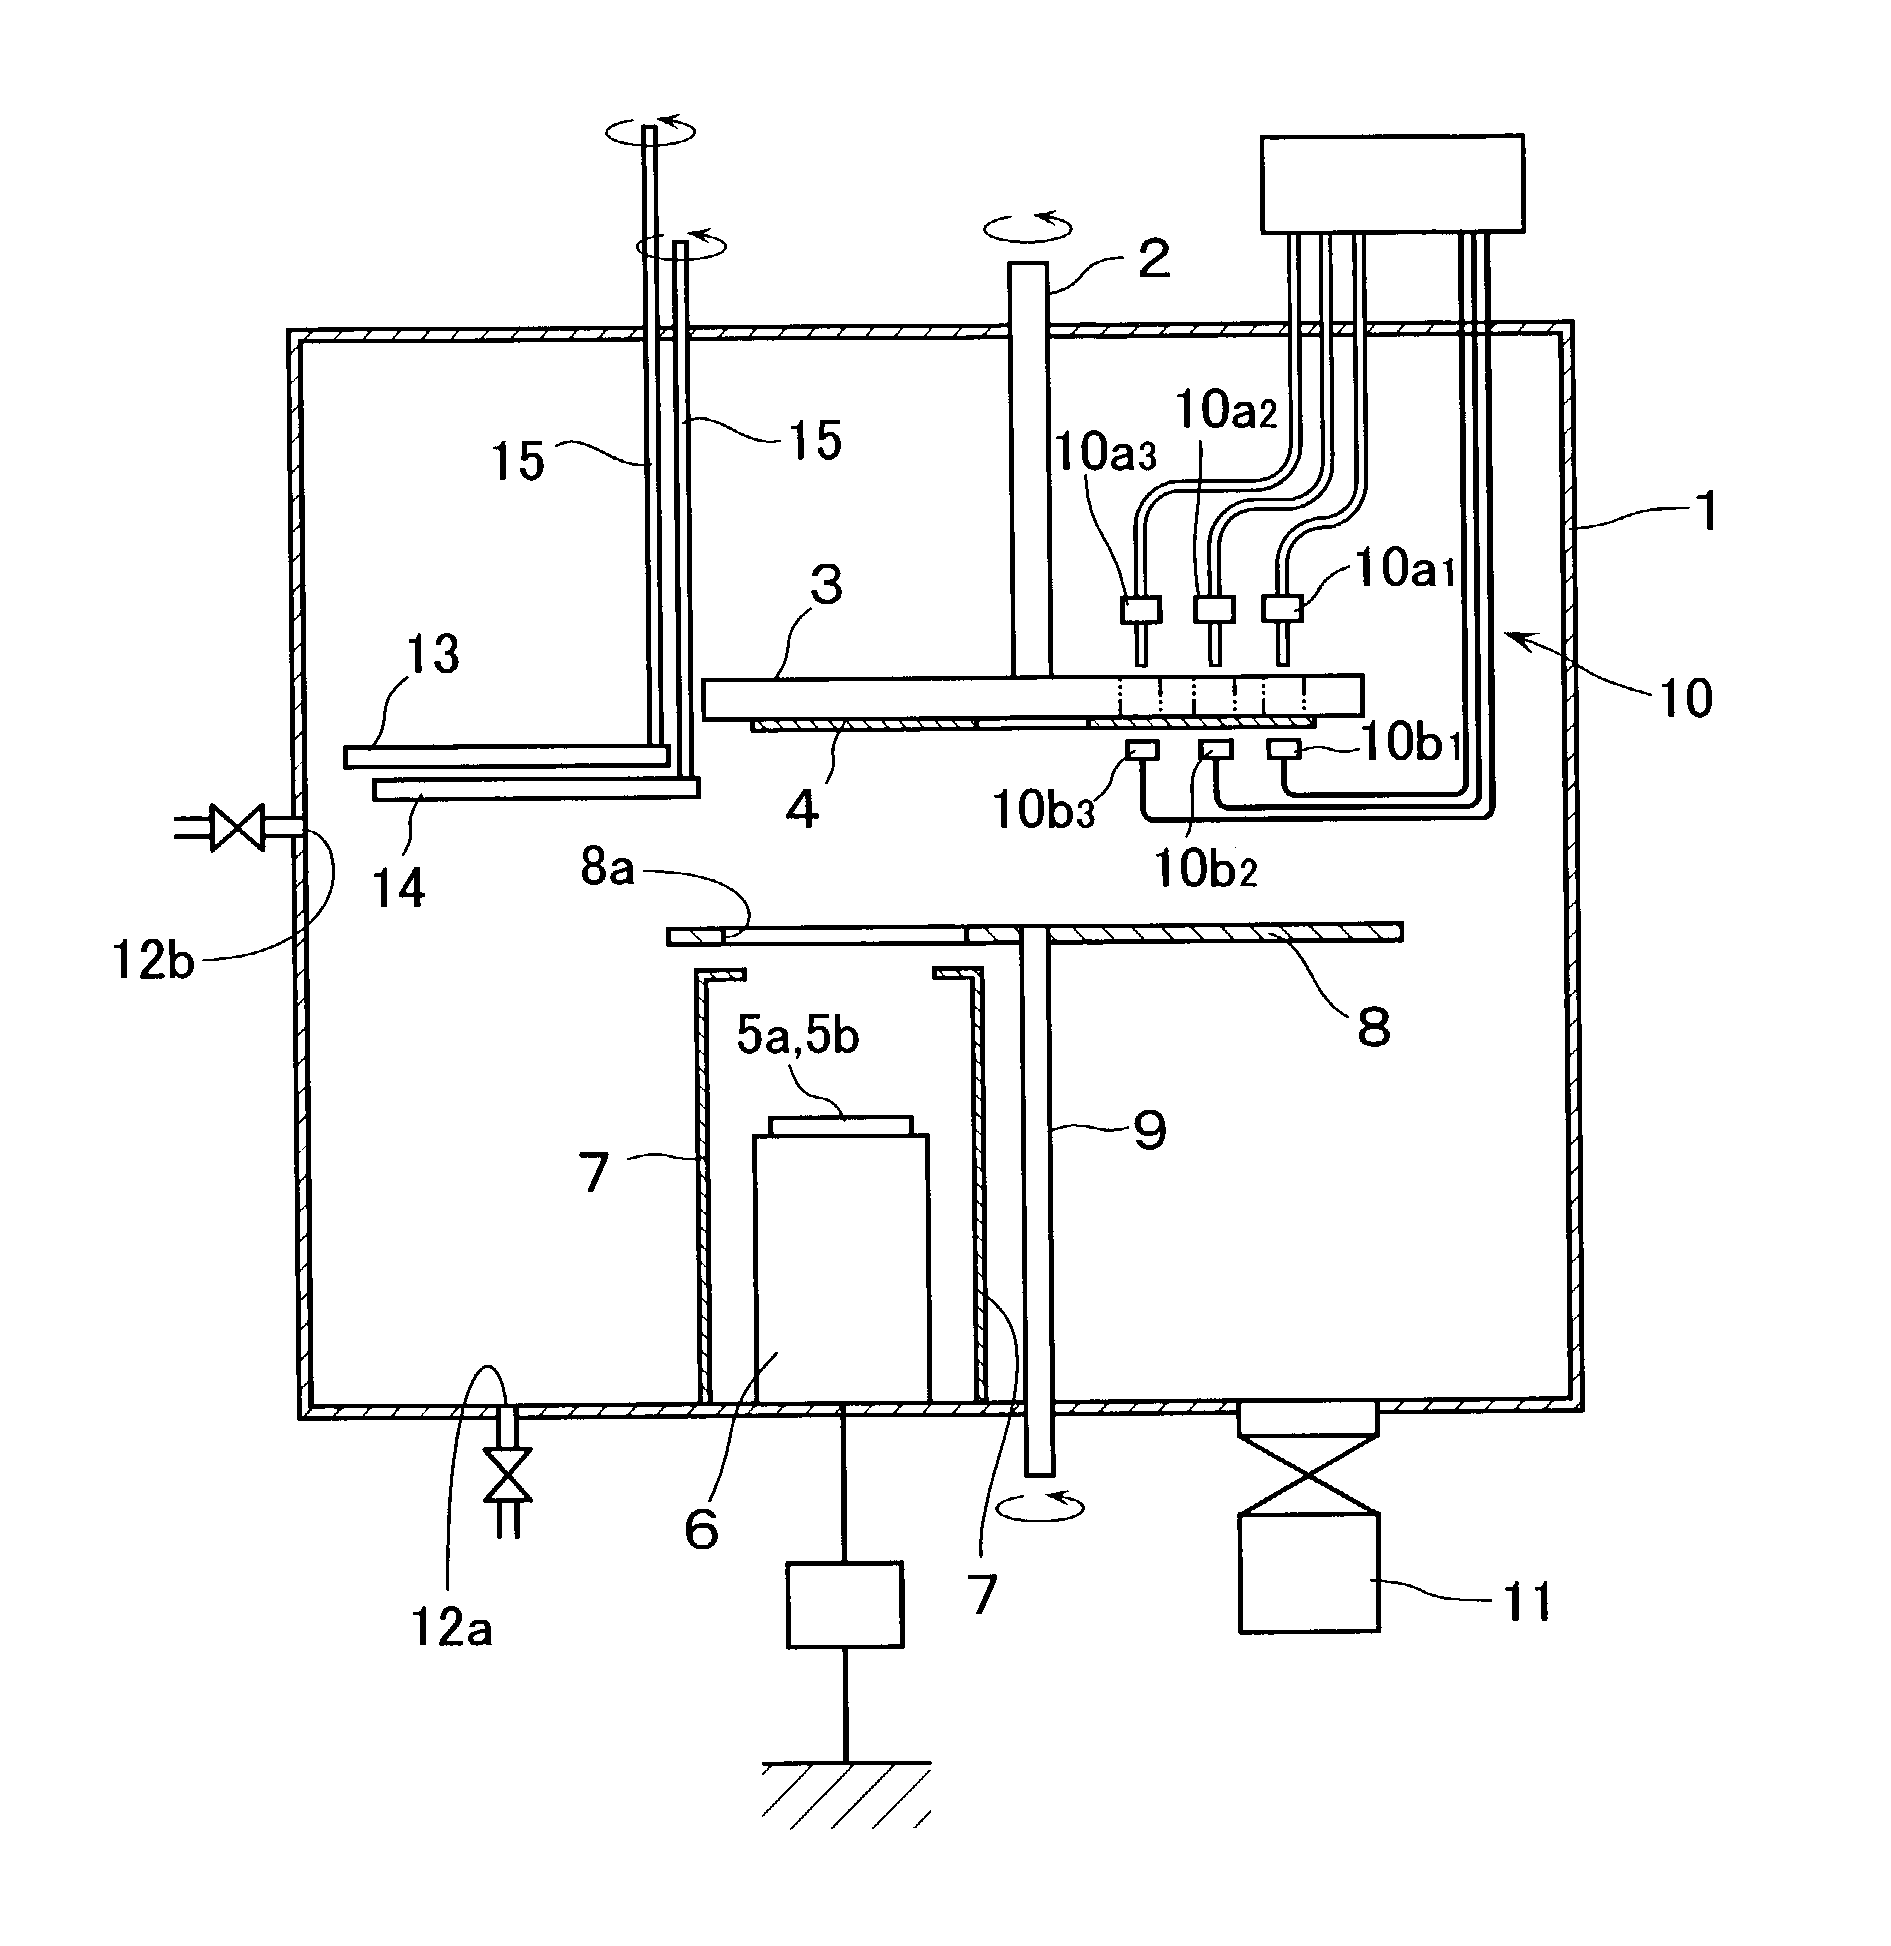 Thin film forming apparatus and method